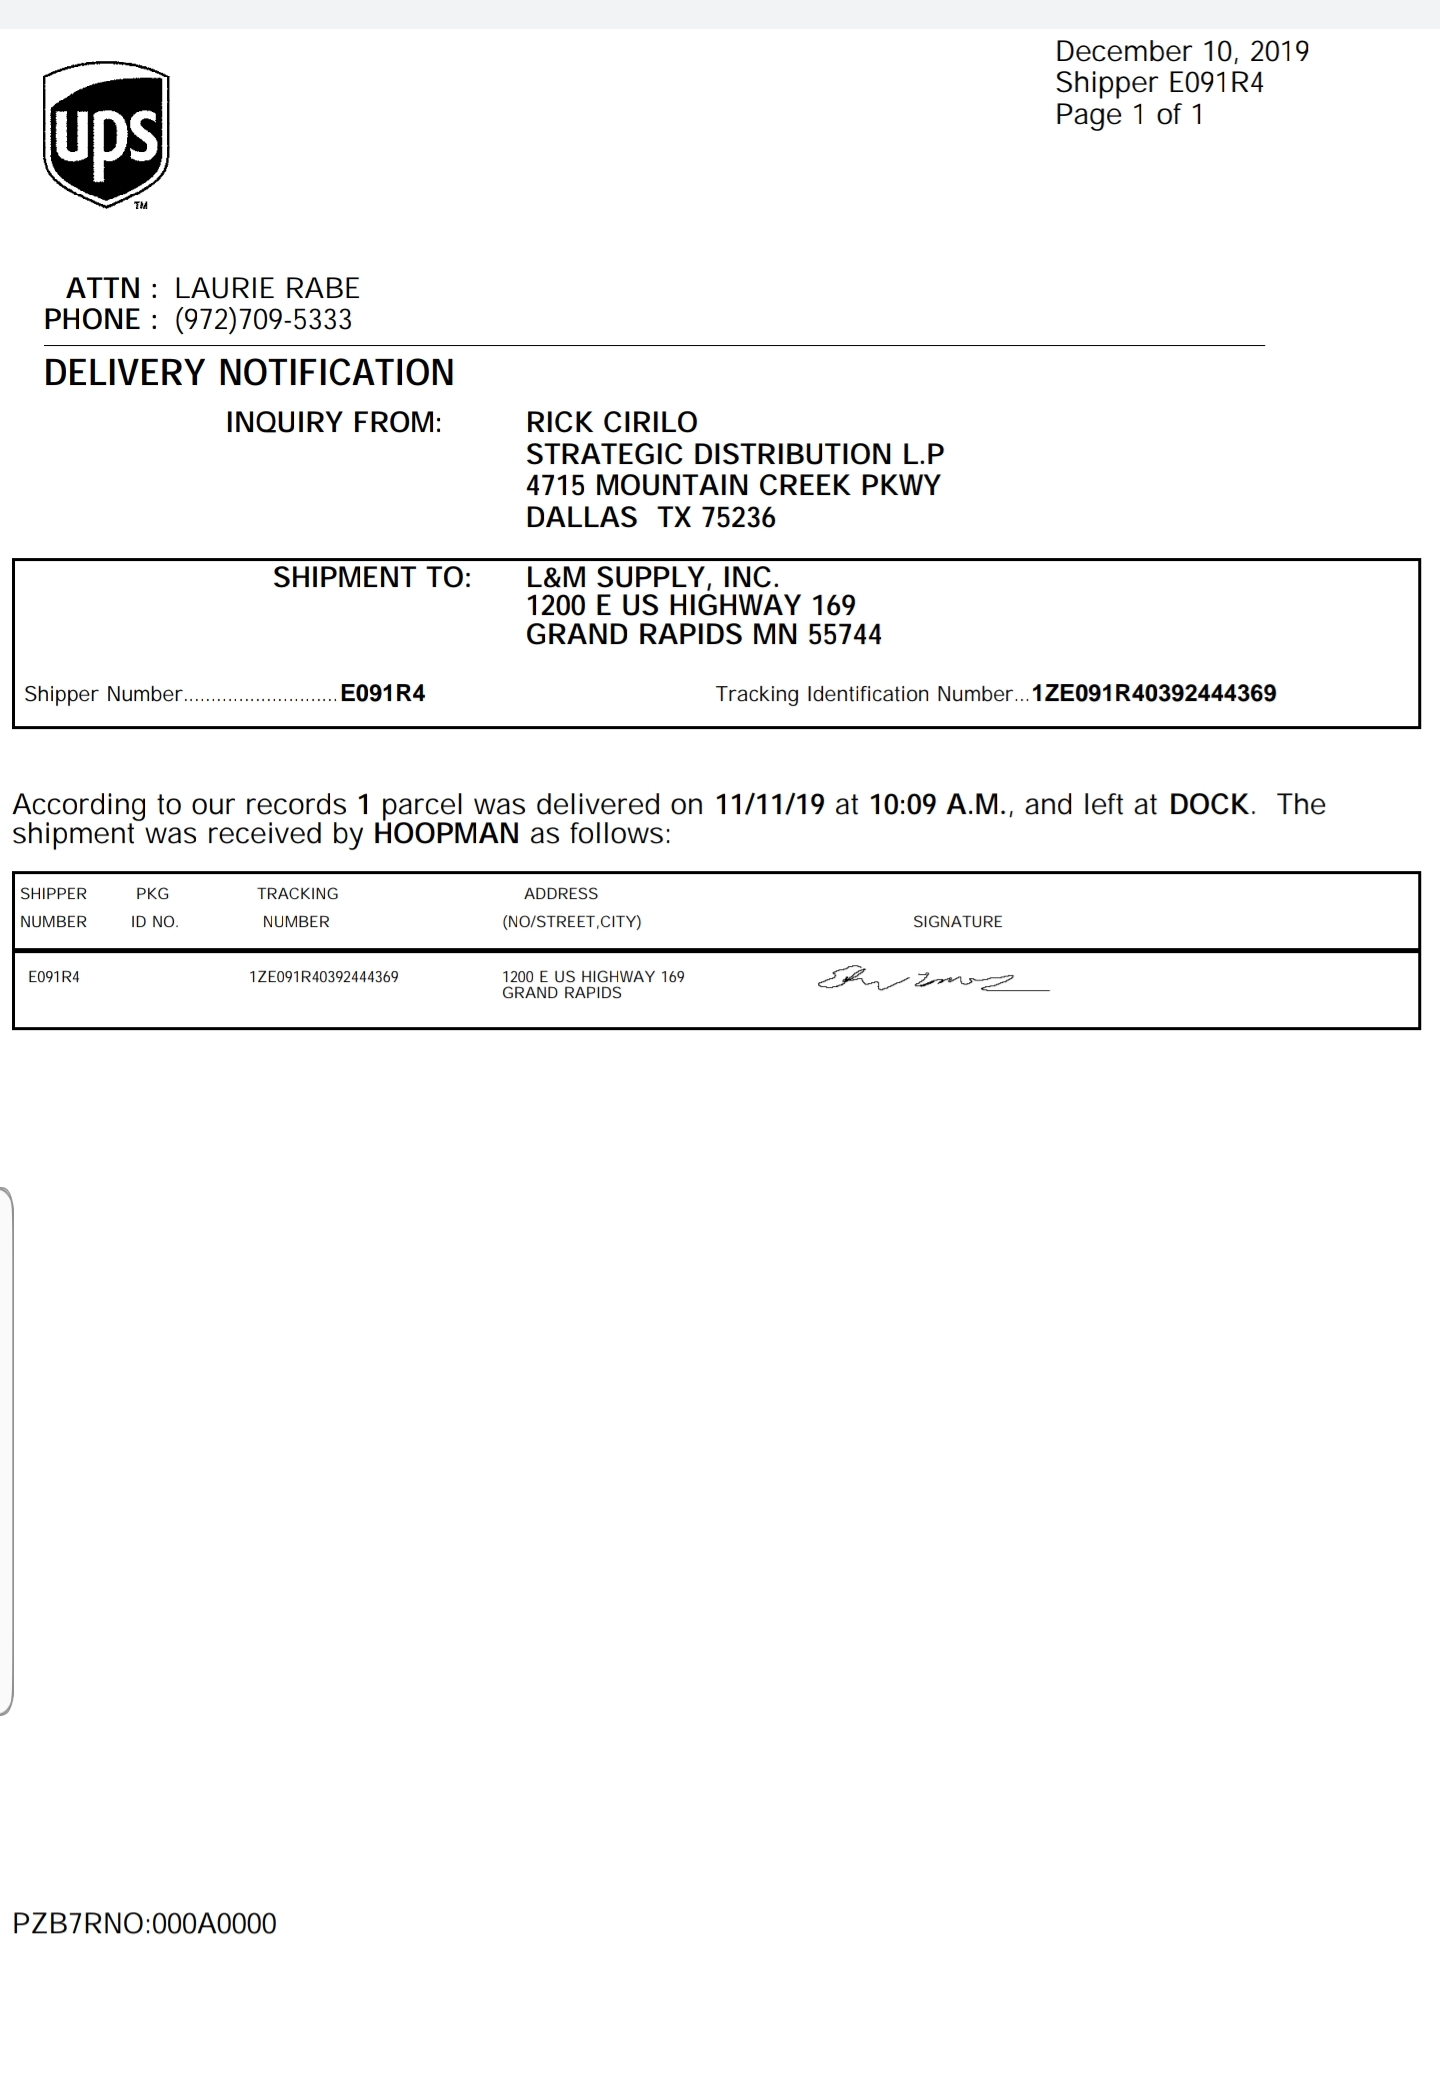 Document that paypal requested from UPS 